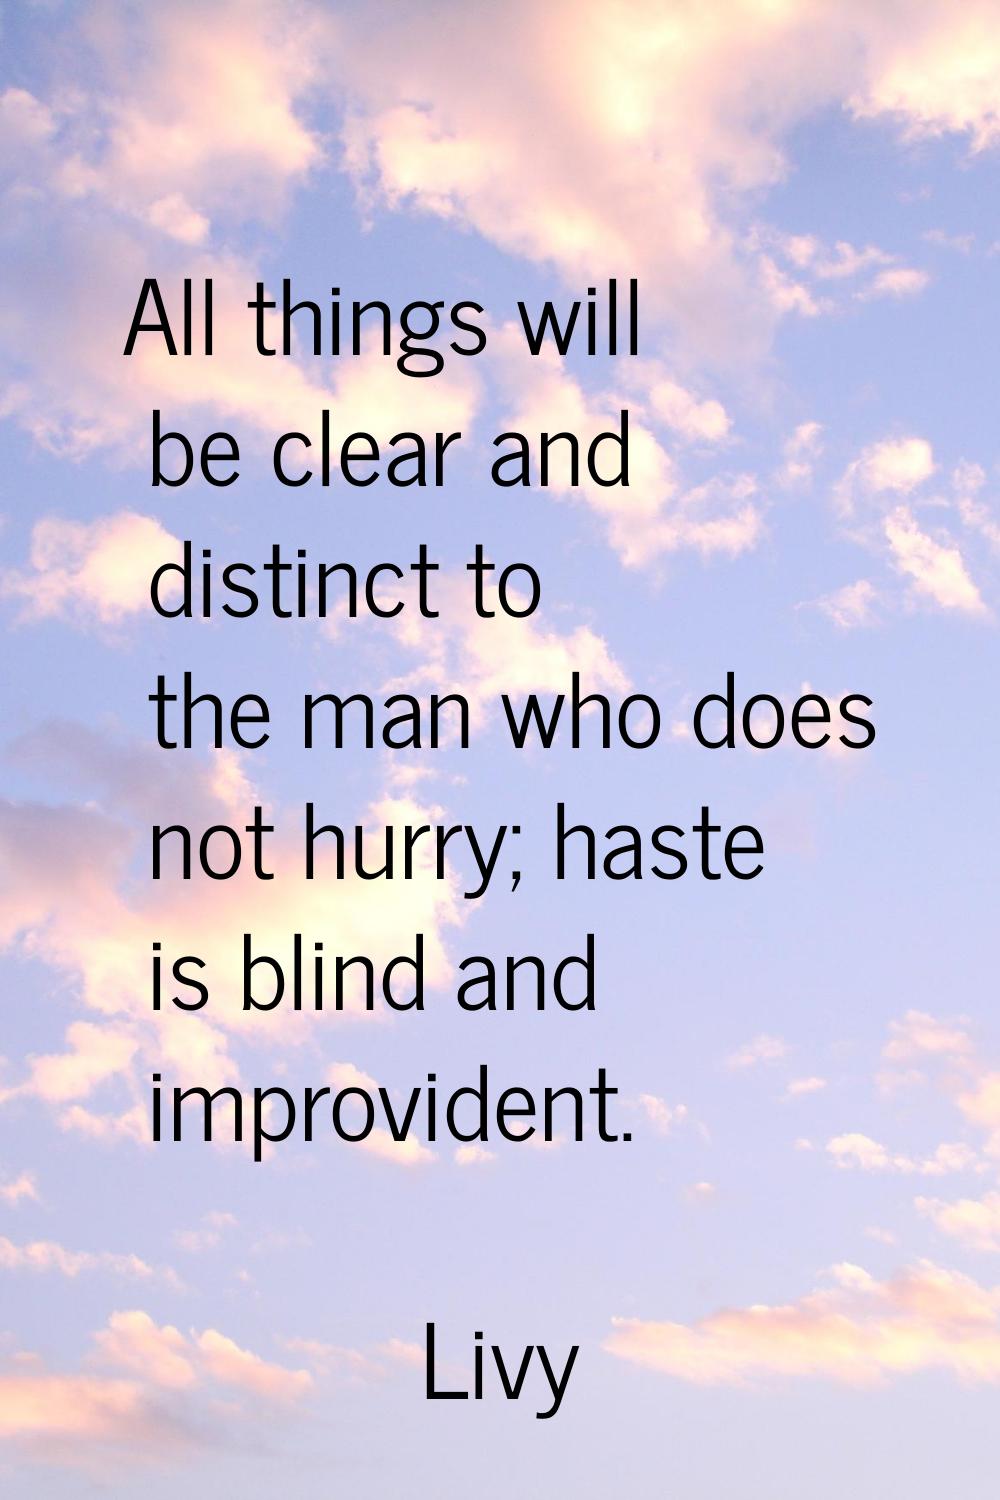 All things will be clear and distinct to the man who does not hurry; haste is blind and improvident